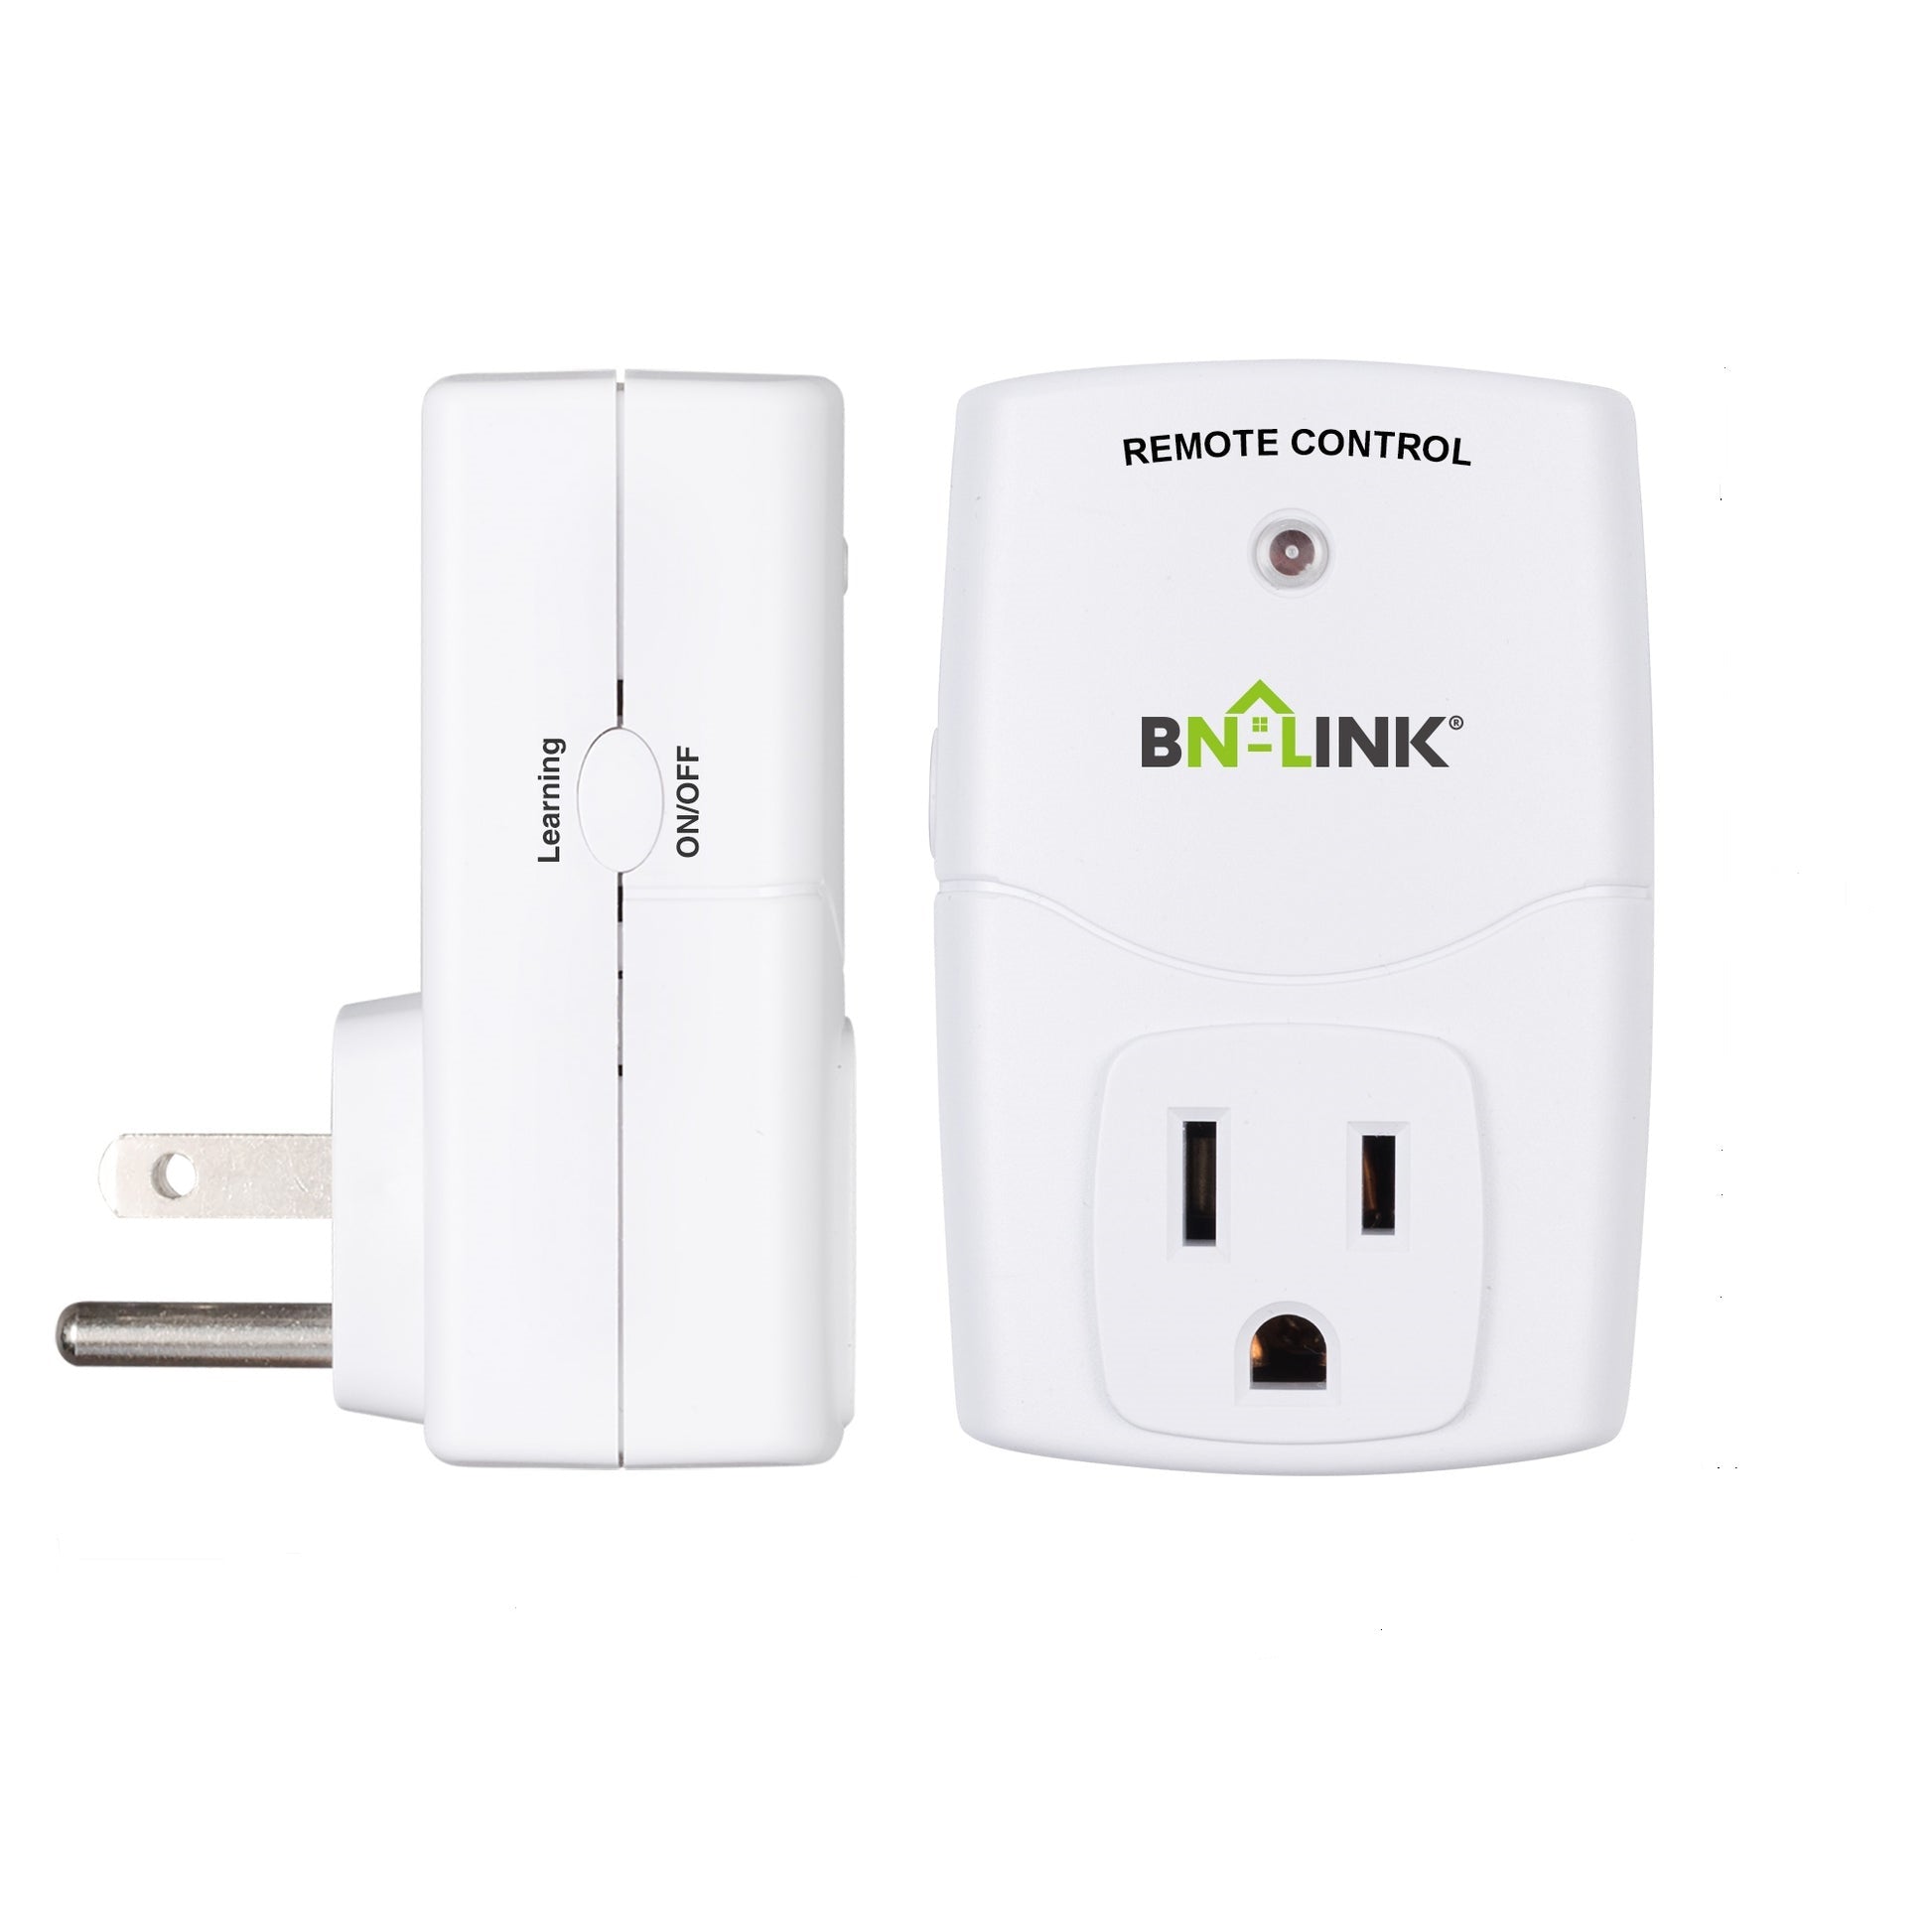 BN-LINK Wireless Remote Control Electrical Outlet Switch for Lights, Fans,  Christmas Lights, Small Appliance, Long Range White 10A/1200W, 1 Remote + 1  Outlet 